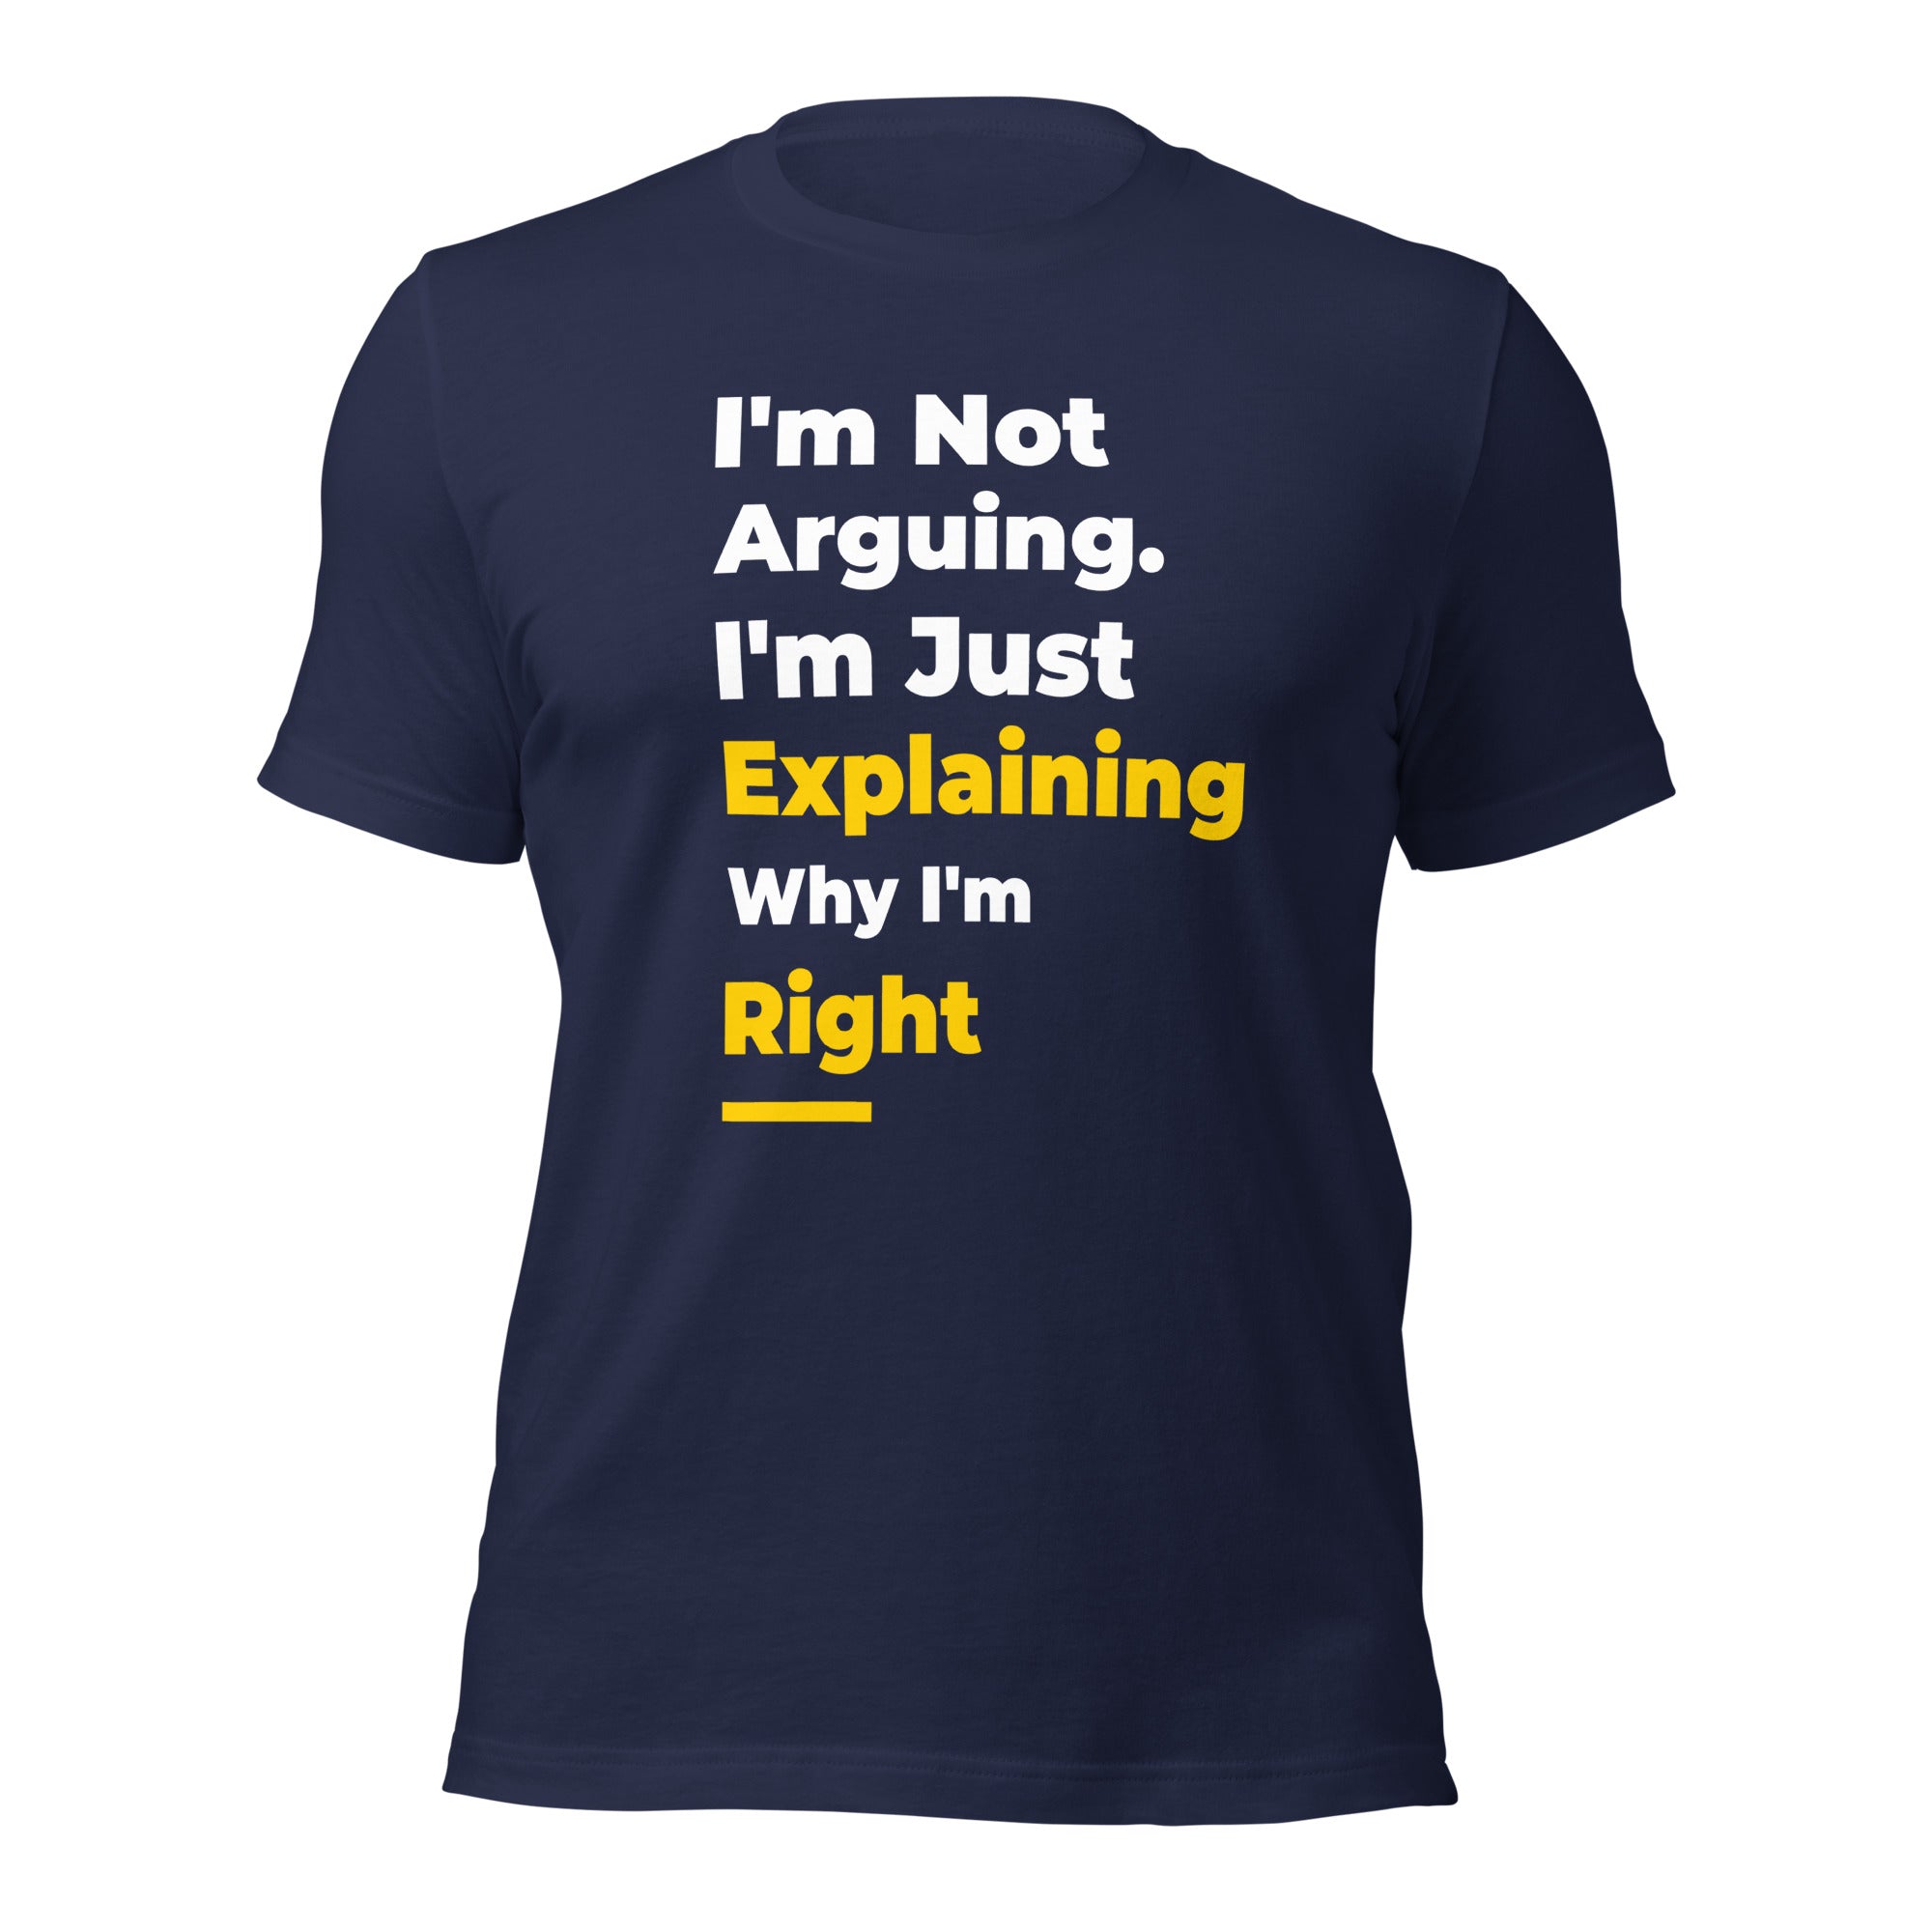 Hilarious Tee, Gag Gift, Humorous Shirt, Funny Debater Gift: I'm Not Arguing, I'm Just Explaining Why I'm Right